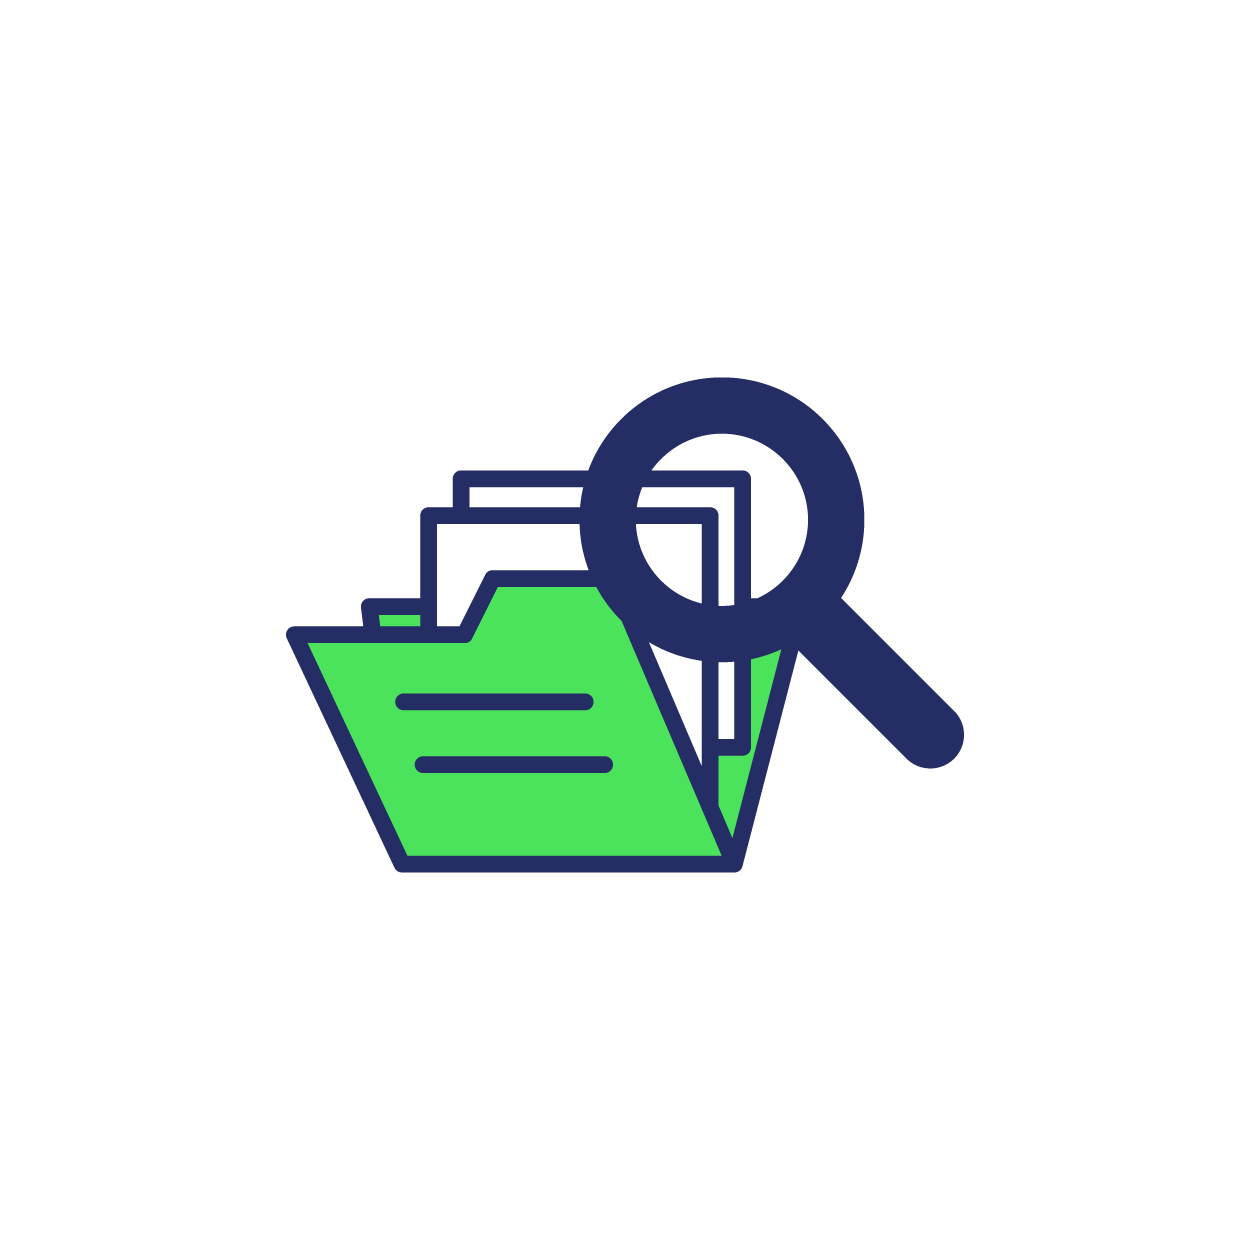 Icon of file folder with resources and magnifying glass.